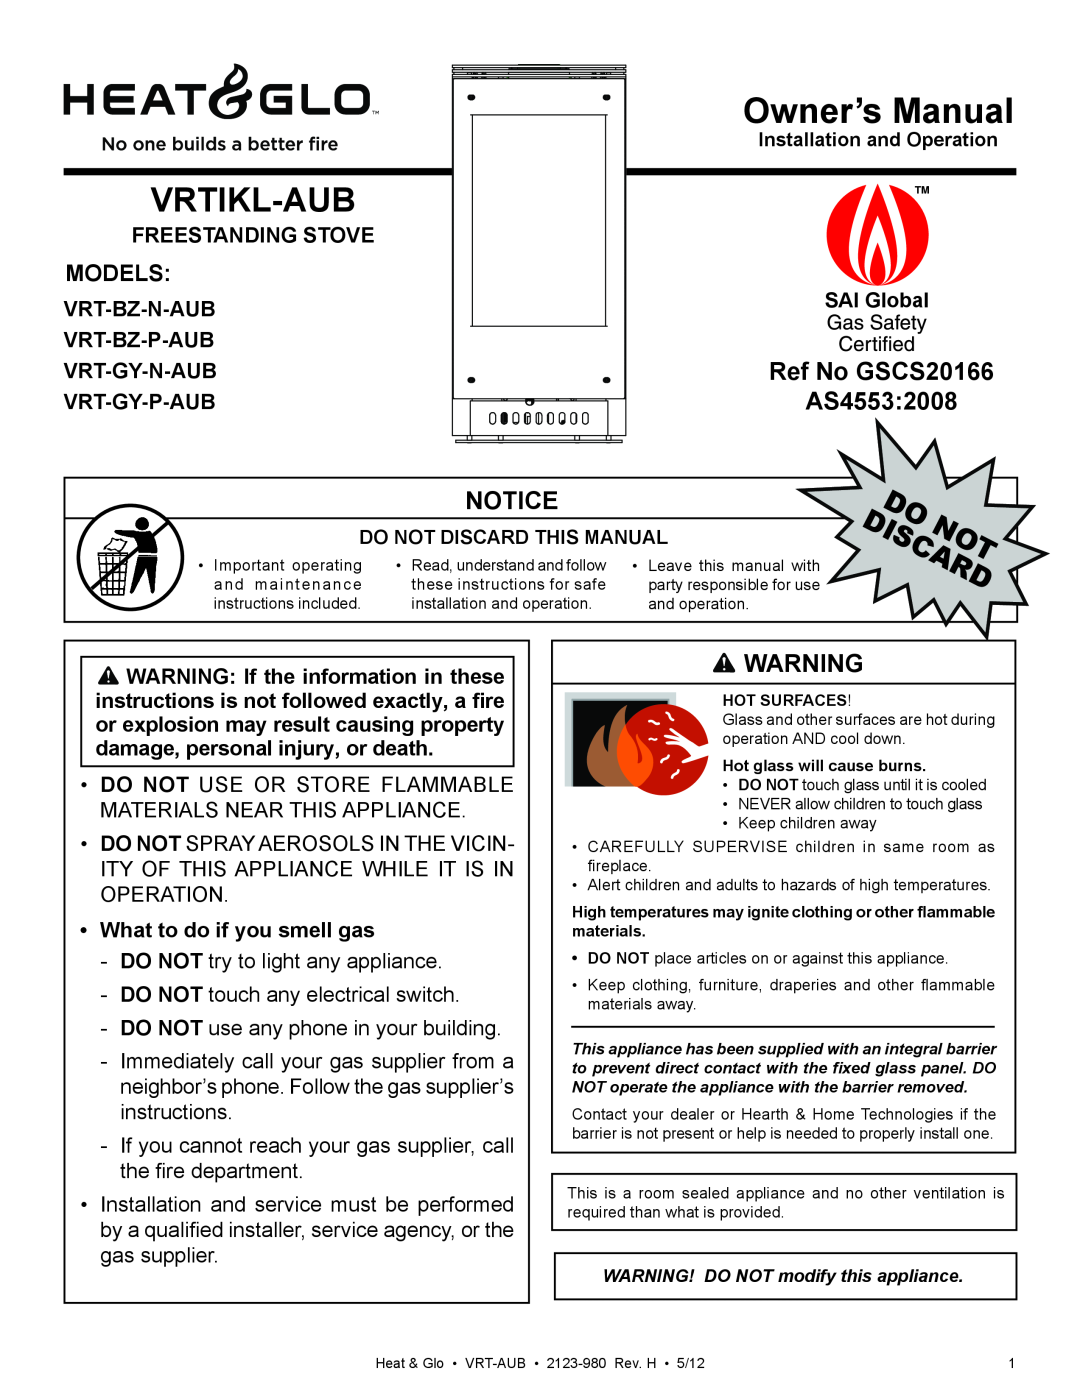 Heat & Glo LifeStyle VRT-GY-P-AUB owner manual Ref No GSCS20166 AS4553, Notice, Models, Freestanding Stove, Vrt-Gy-P-Aub 